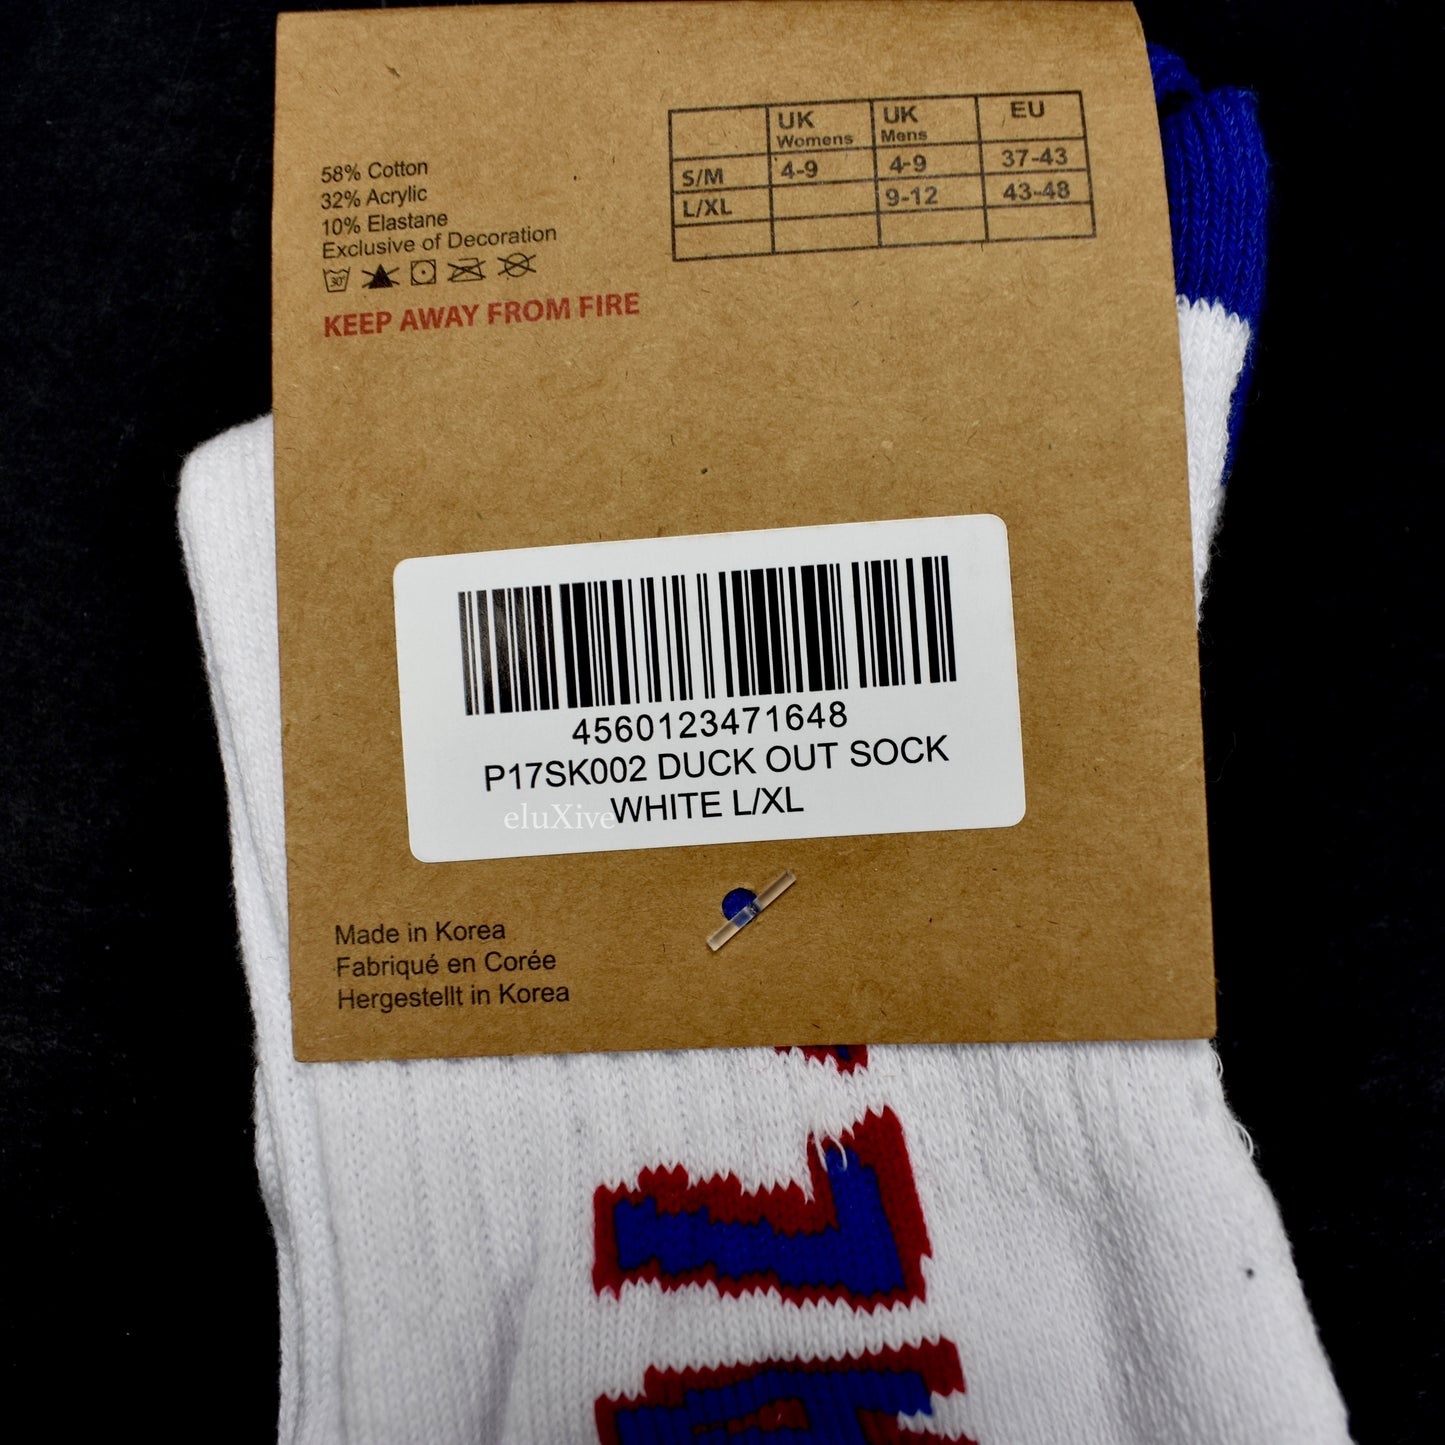 Palace - Duck Out P-Logo Socks (White)